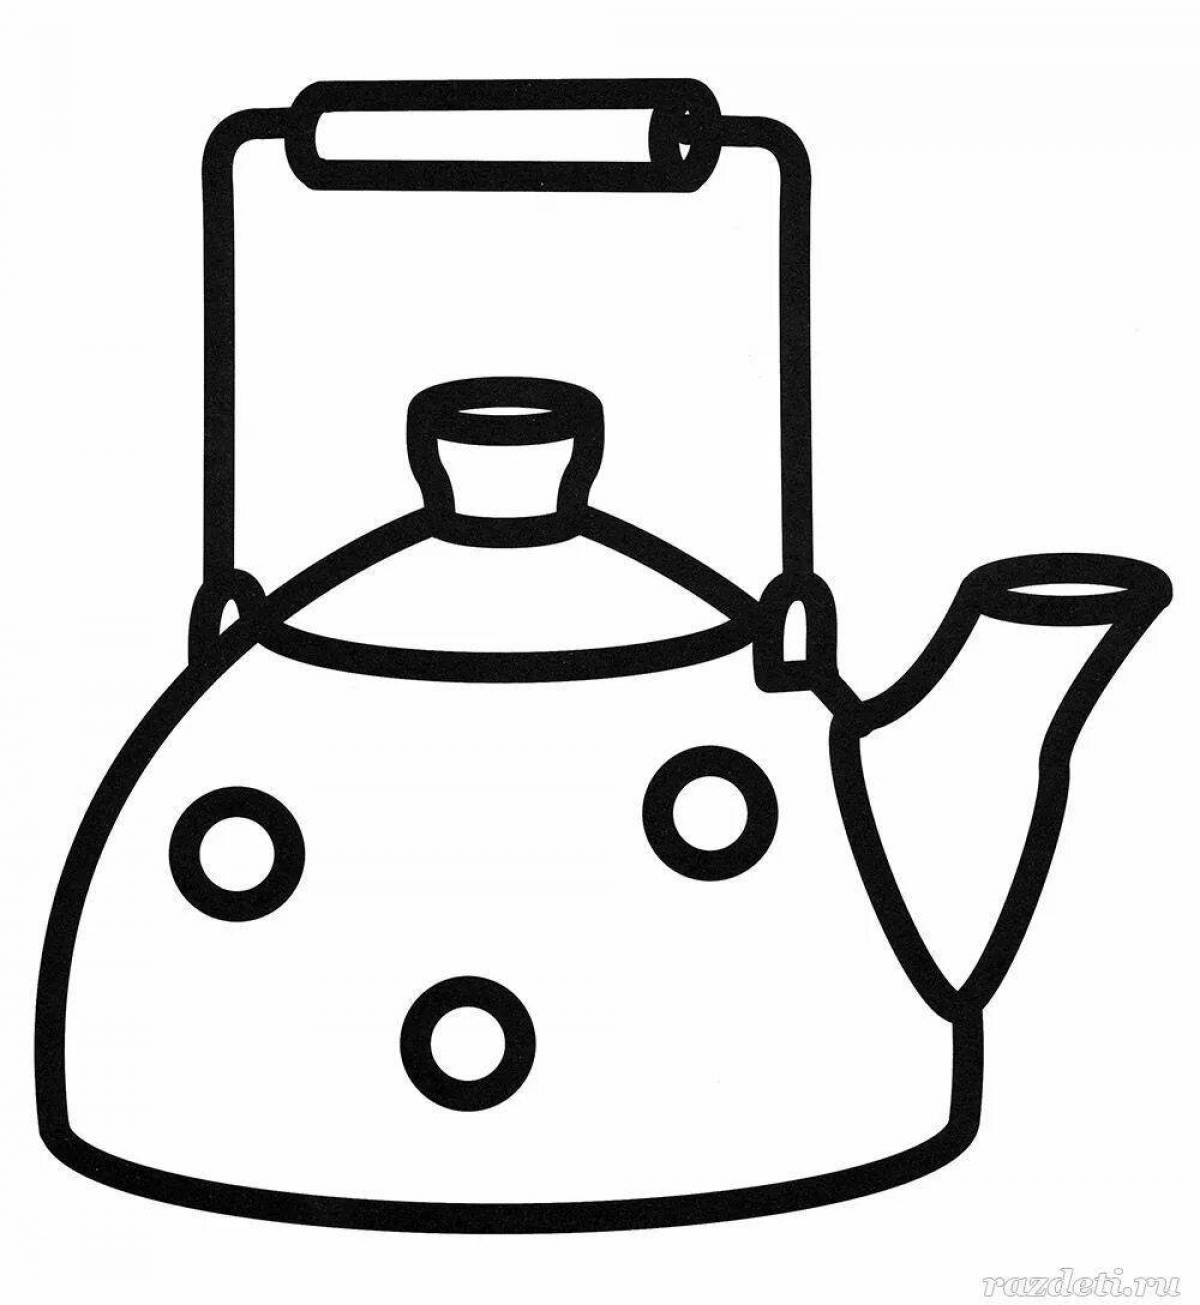 Flawless coloring of children's kettle